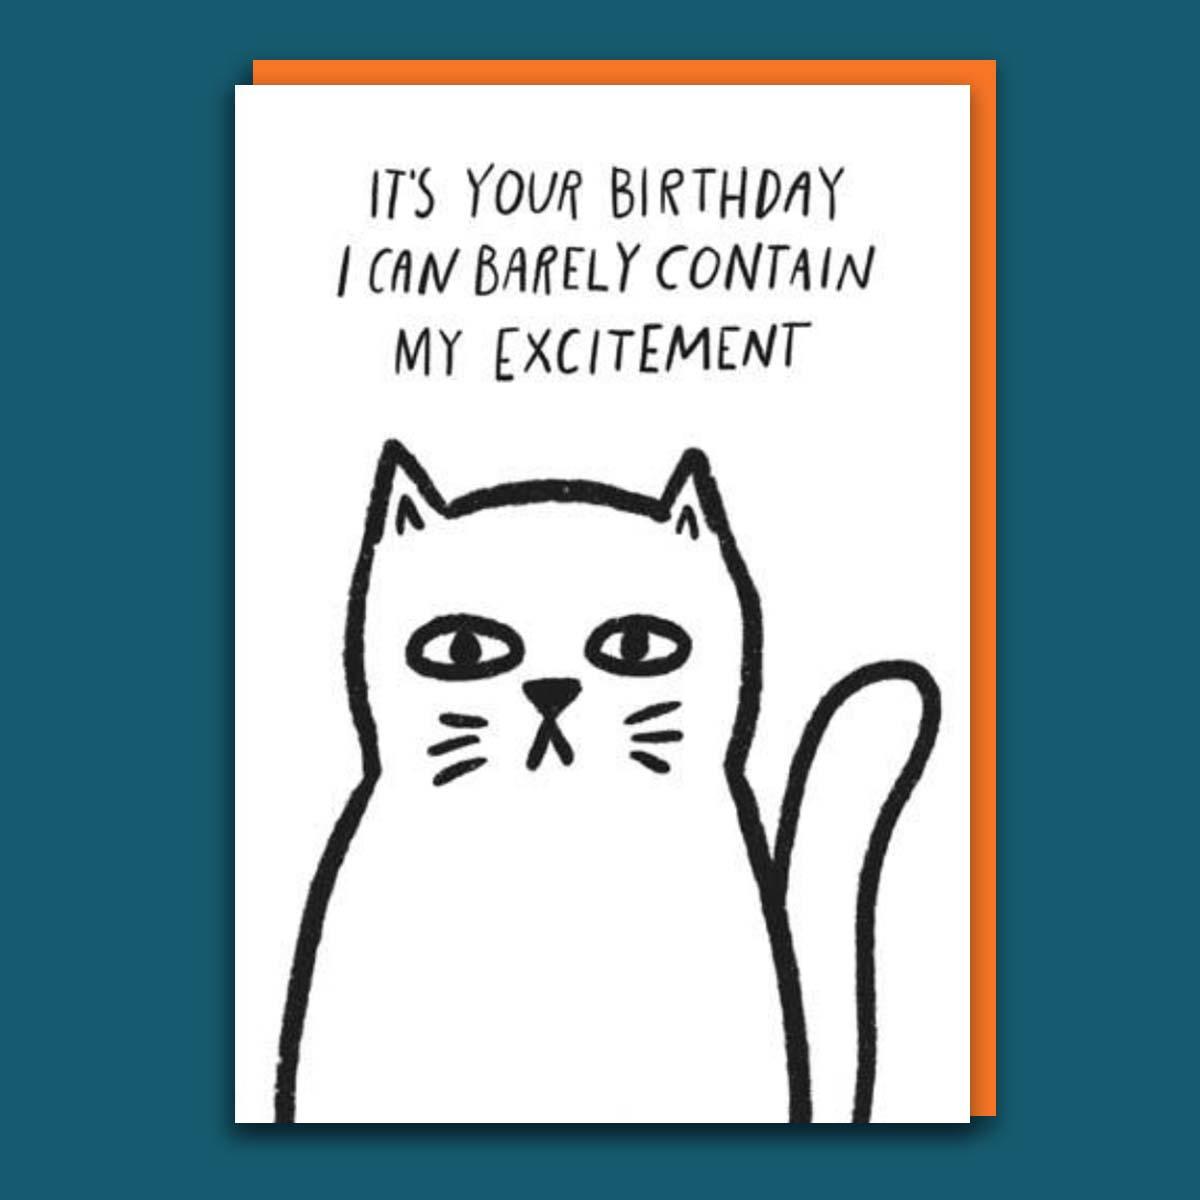 Cuckoo - Excitement Funny Birthday Card Front Image